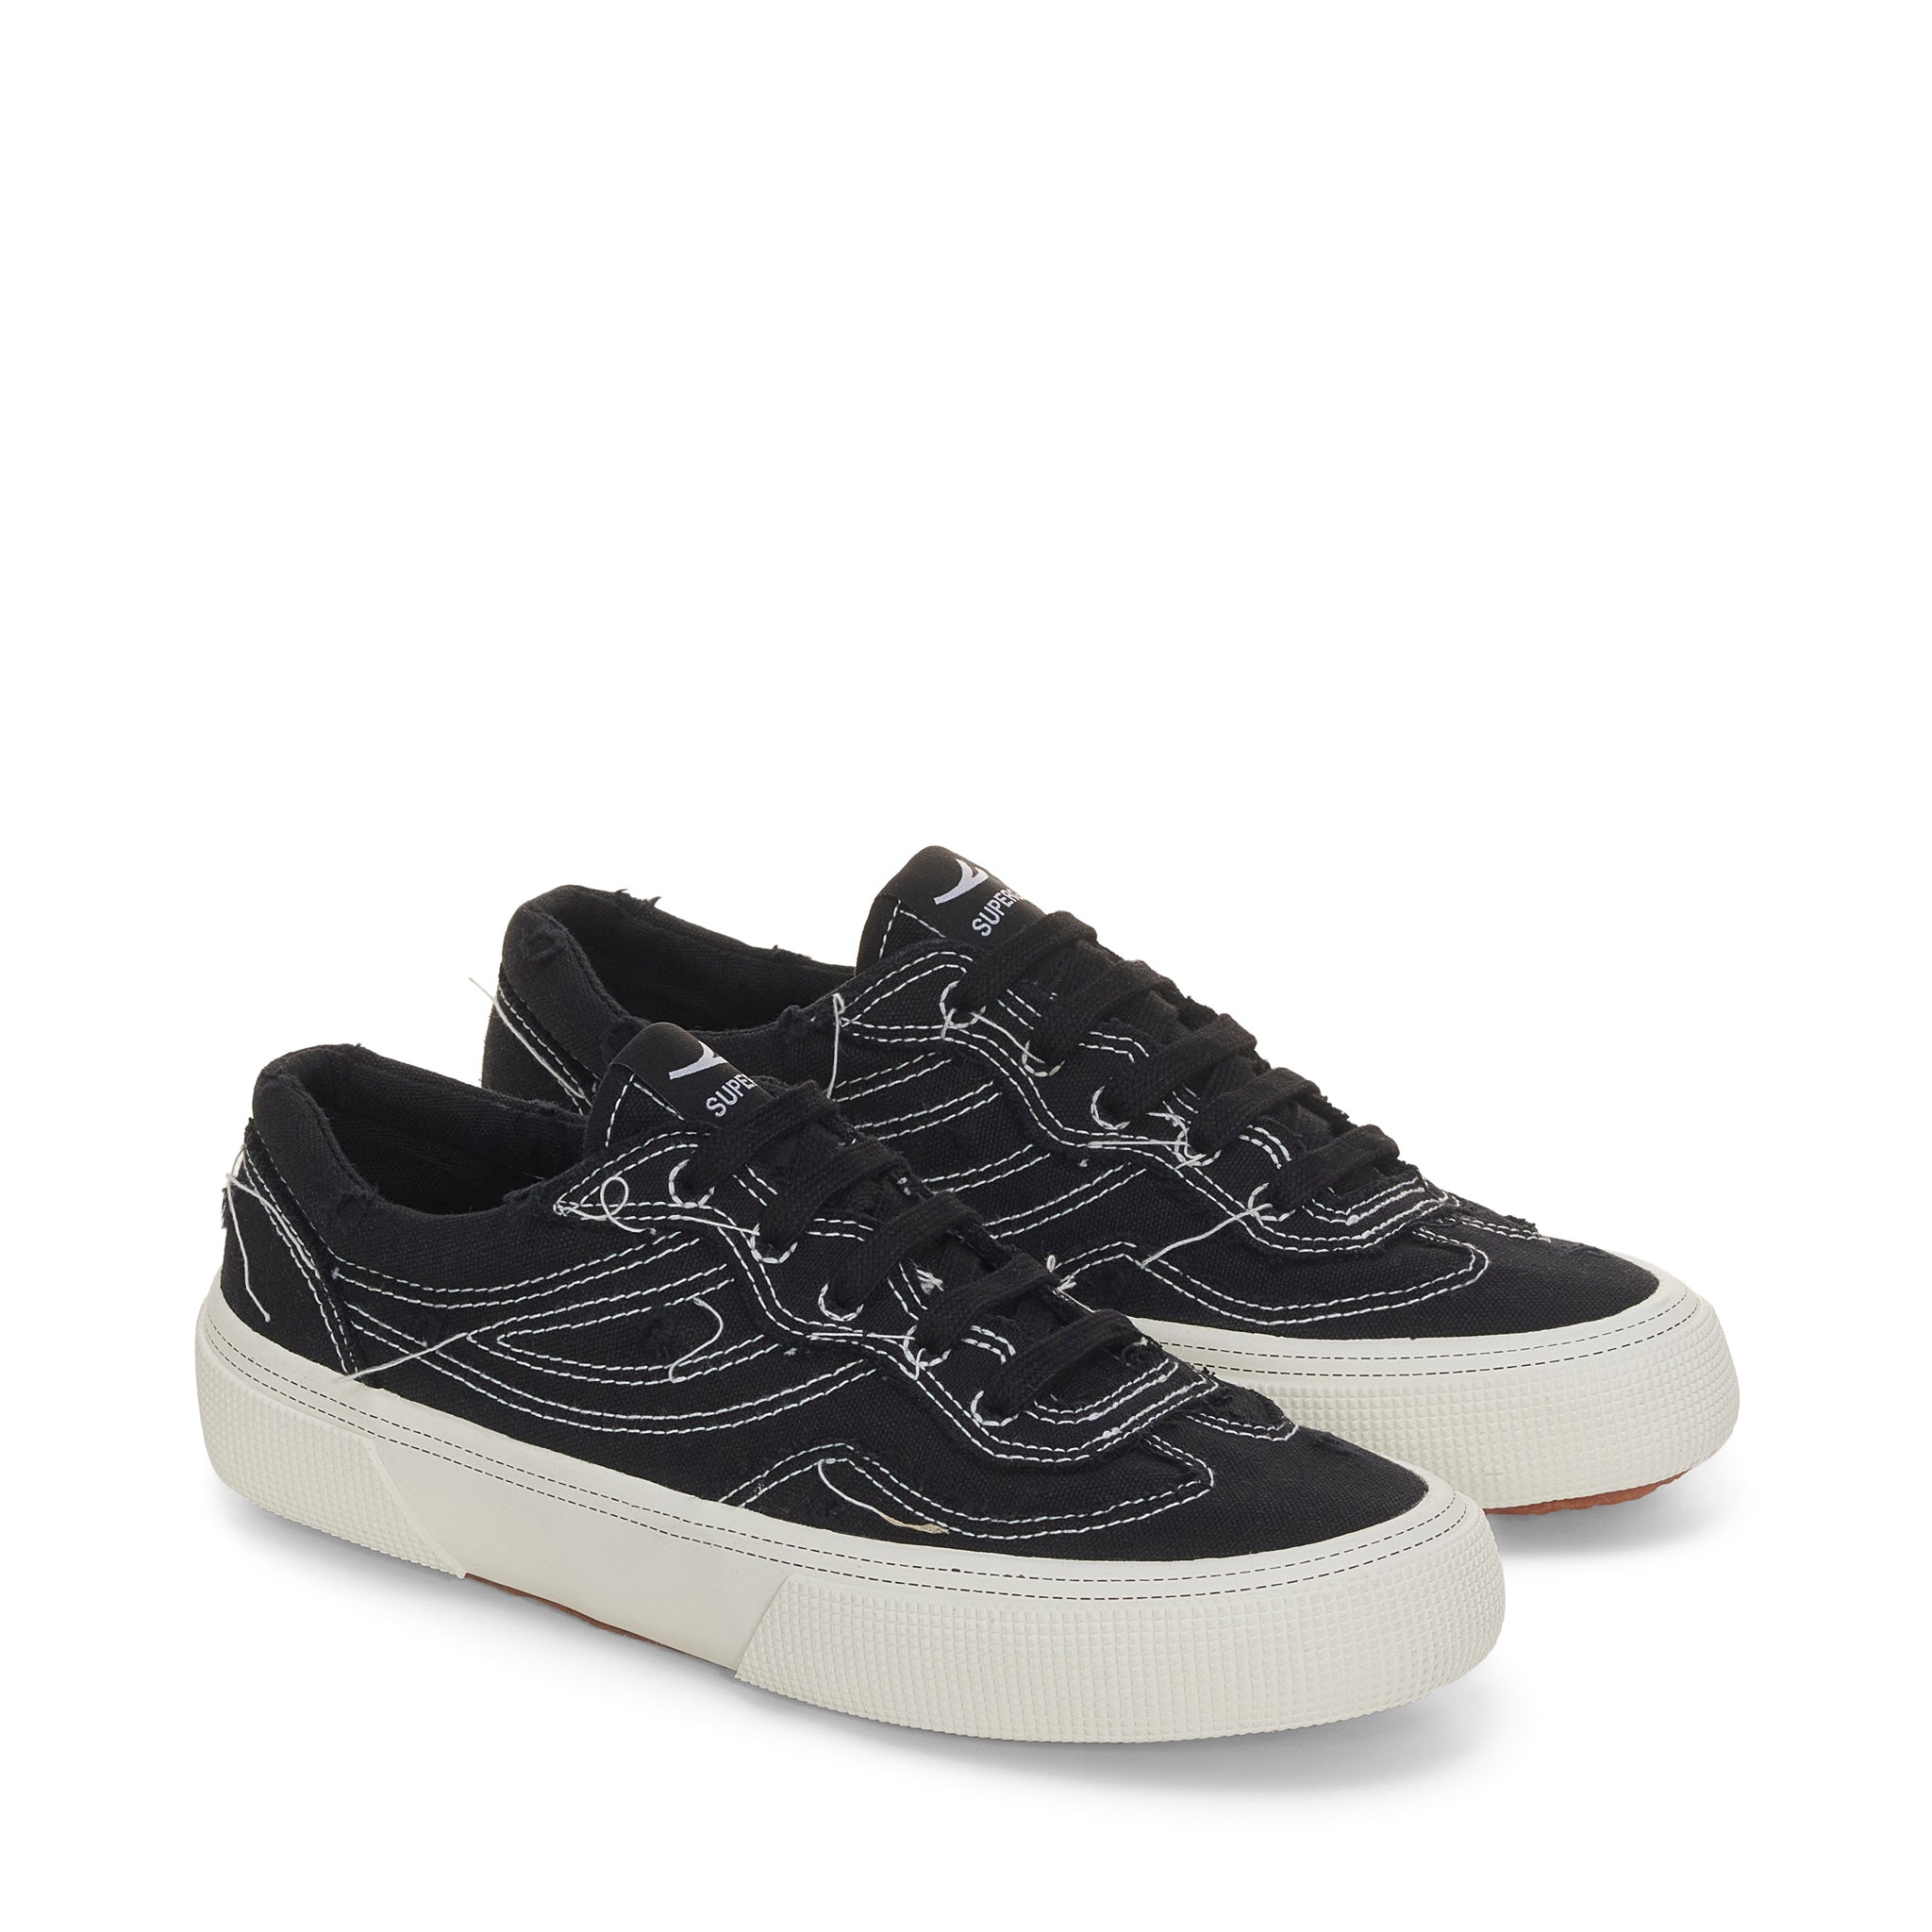 Superga 2941 Revolley Distressed Stone Washed Sneakers - Black White Avorio. Front view.